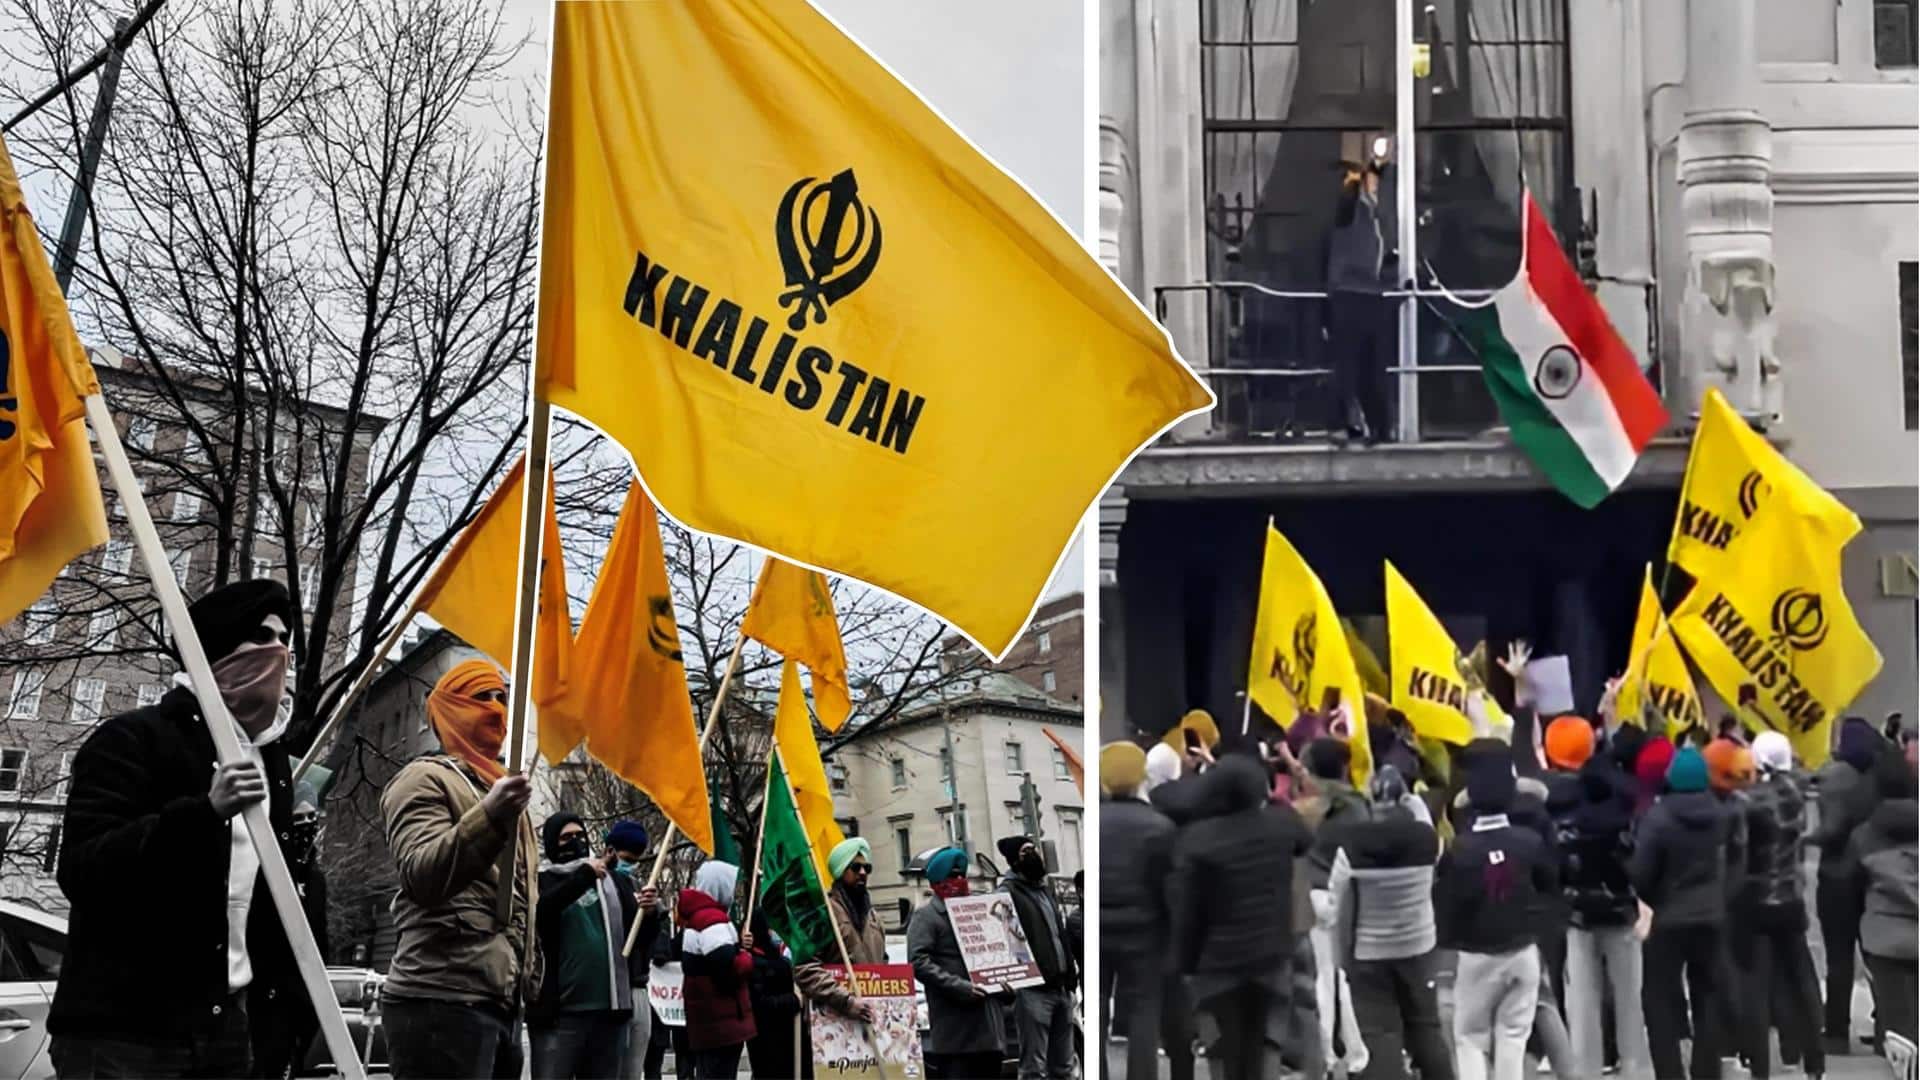 London: Pro-Khalistani supporters remove Indian flag, here's what happened next